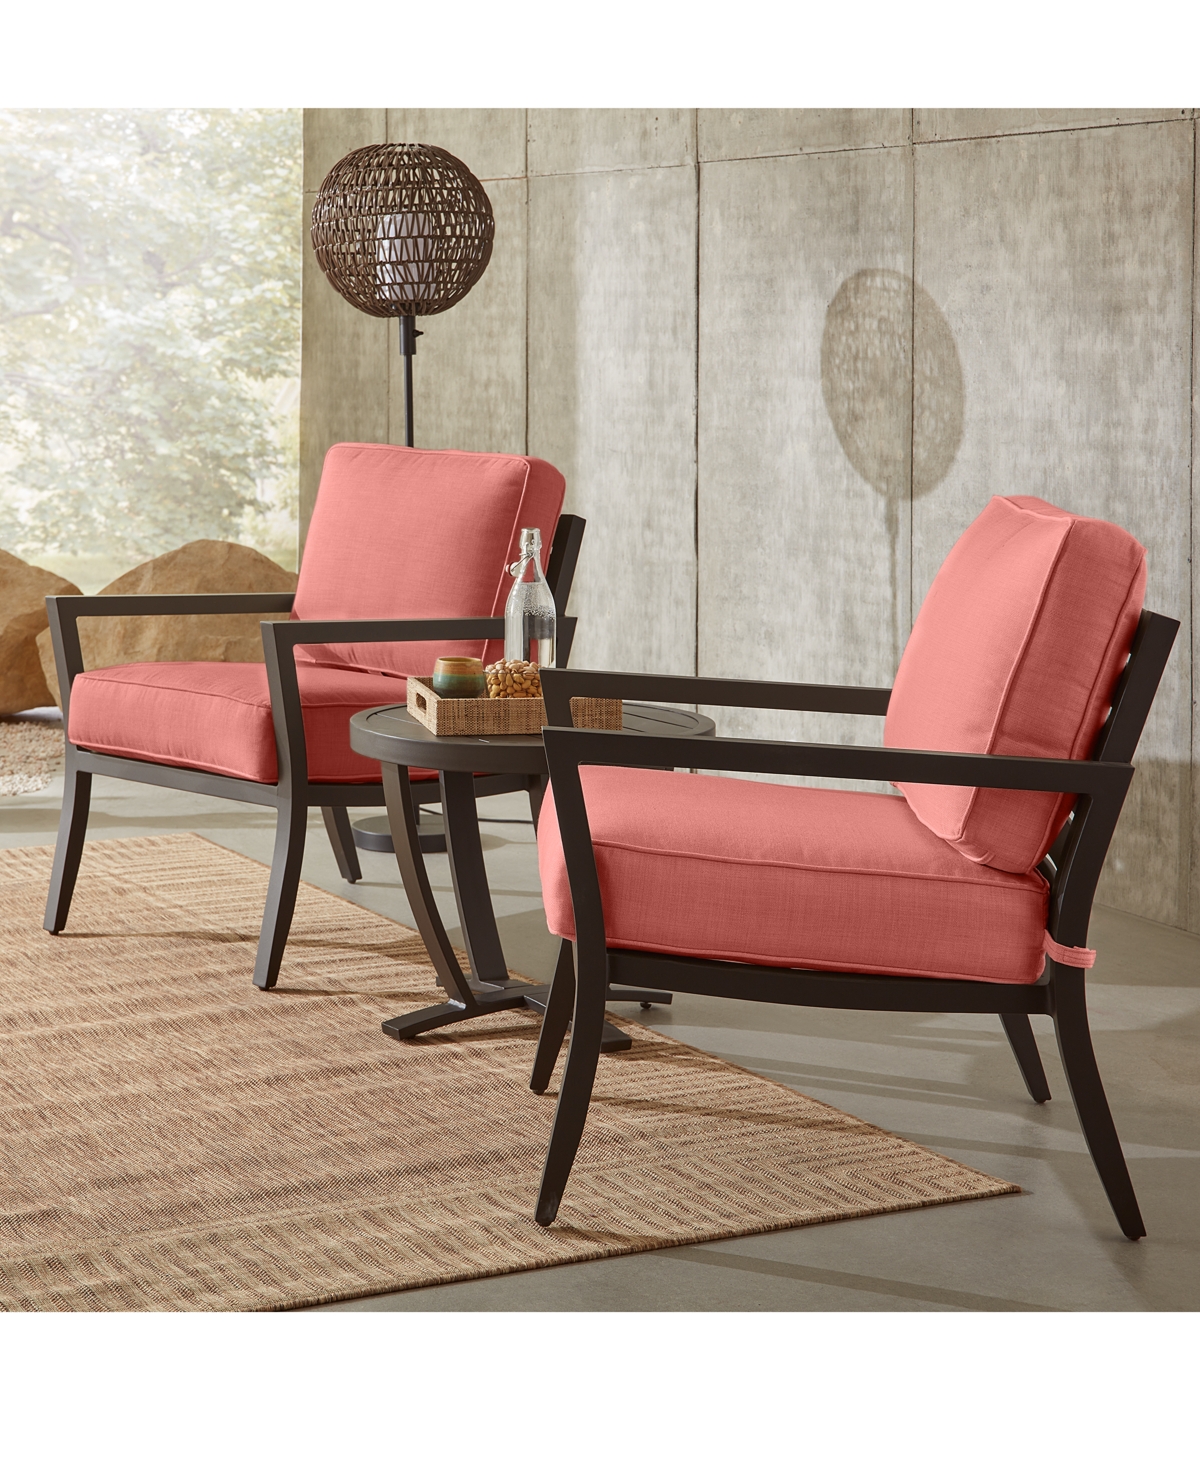 Shop Agio Astaire Outdoor 3-pc Lounge Chair Set (2 Lounge Chairs + 1 End Table) In Straw Natural